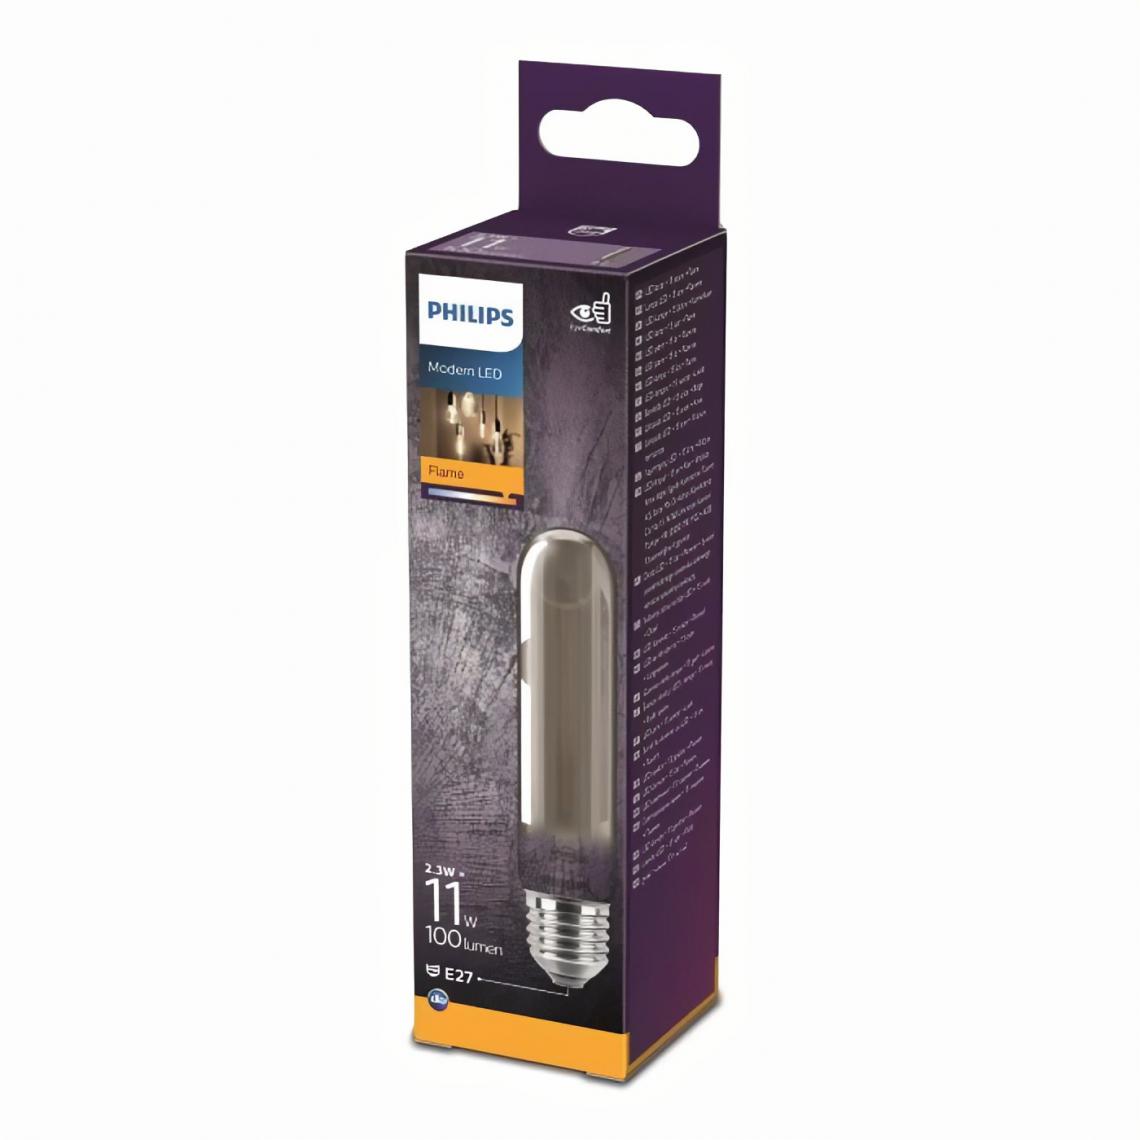 Philips - Philips ampoule LED Equivalent 11W E27 smoky Blanc chaud non dimmable, Verre - Ampoules LED